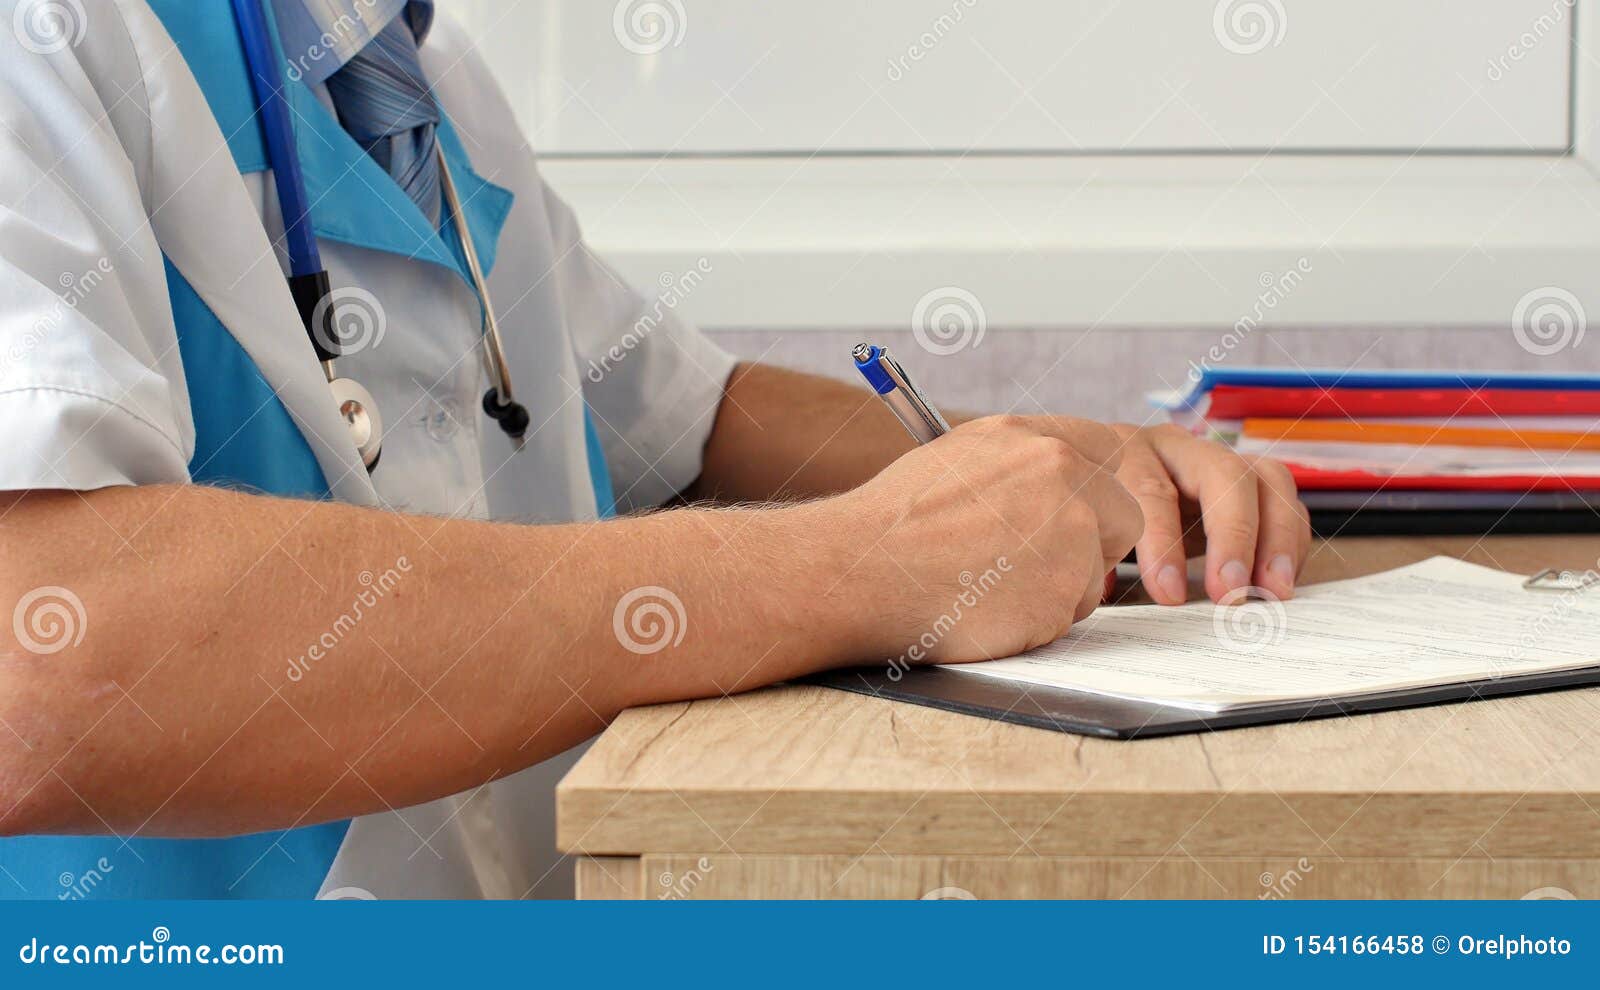 writing for healthcare professionals